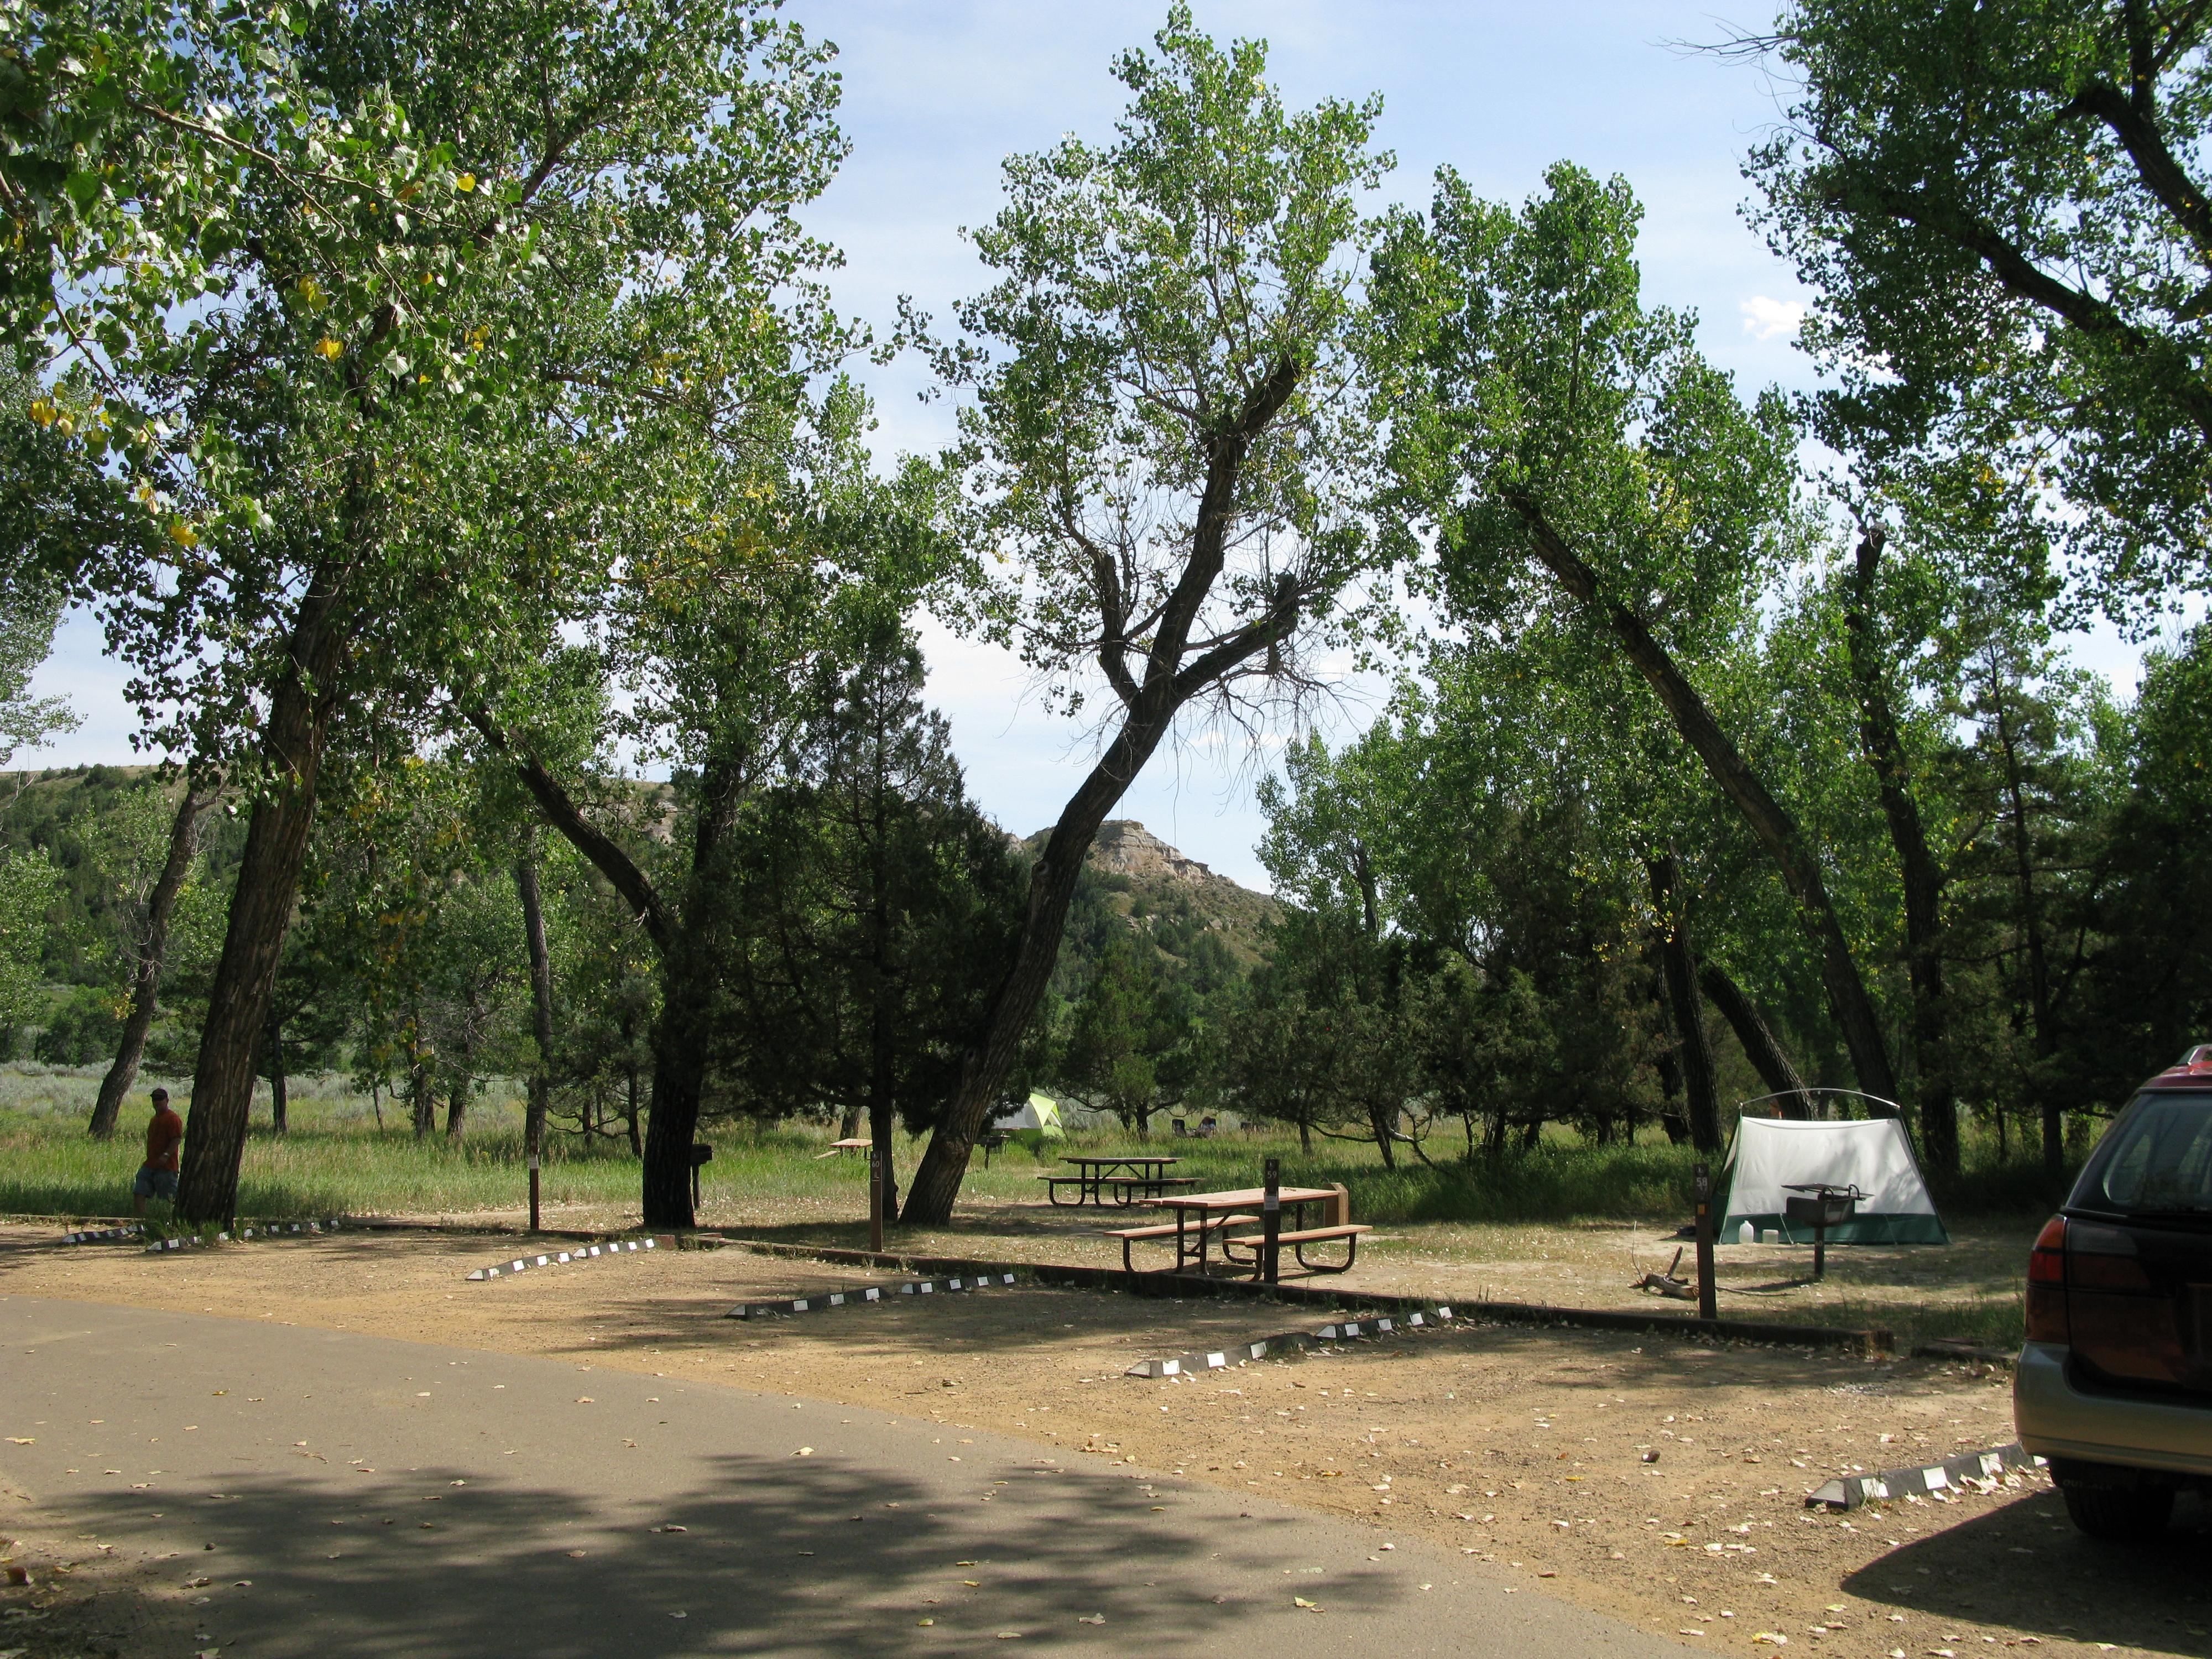 A quiet campground setting with tents and picnic tables beneath spindly cottonwood trees.